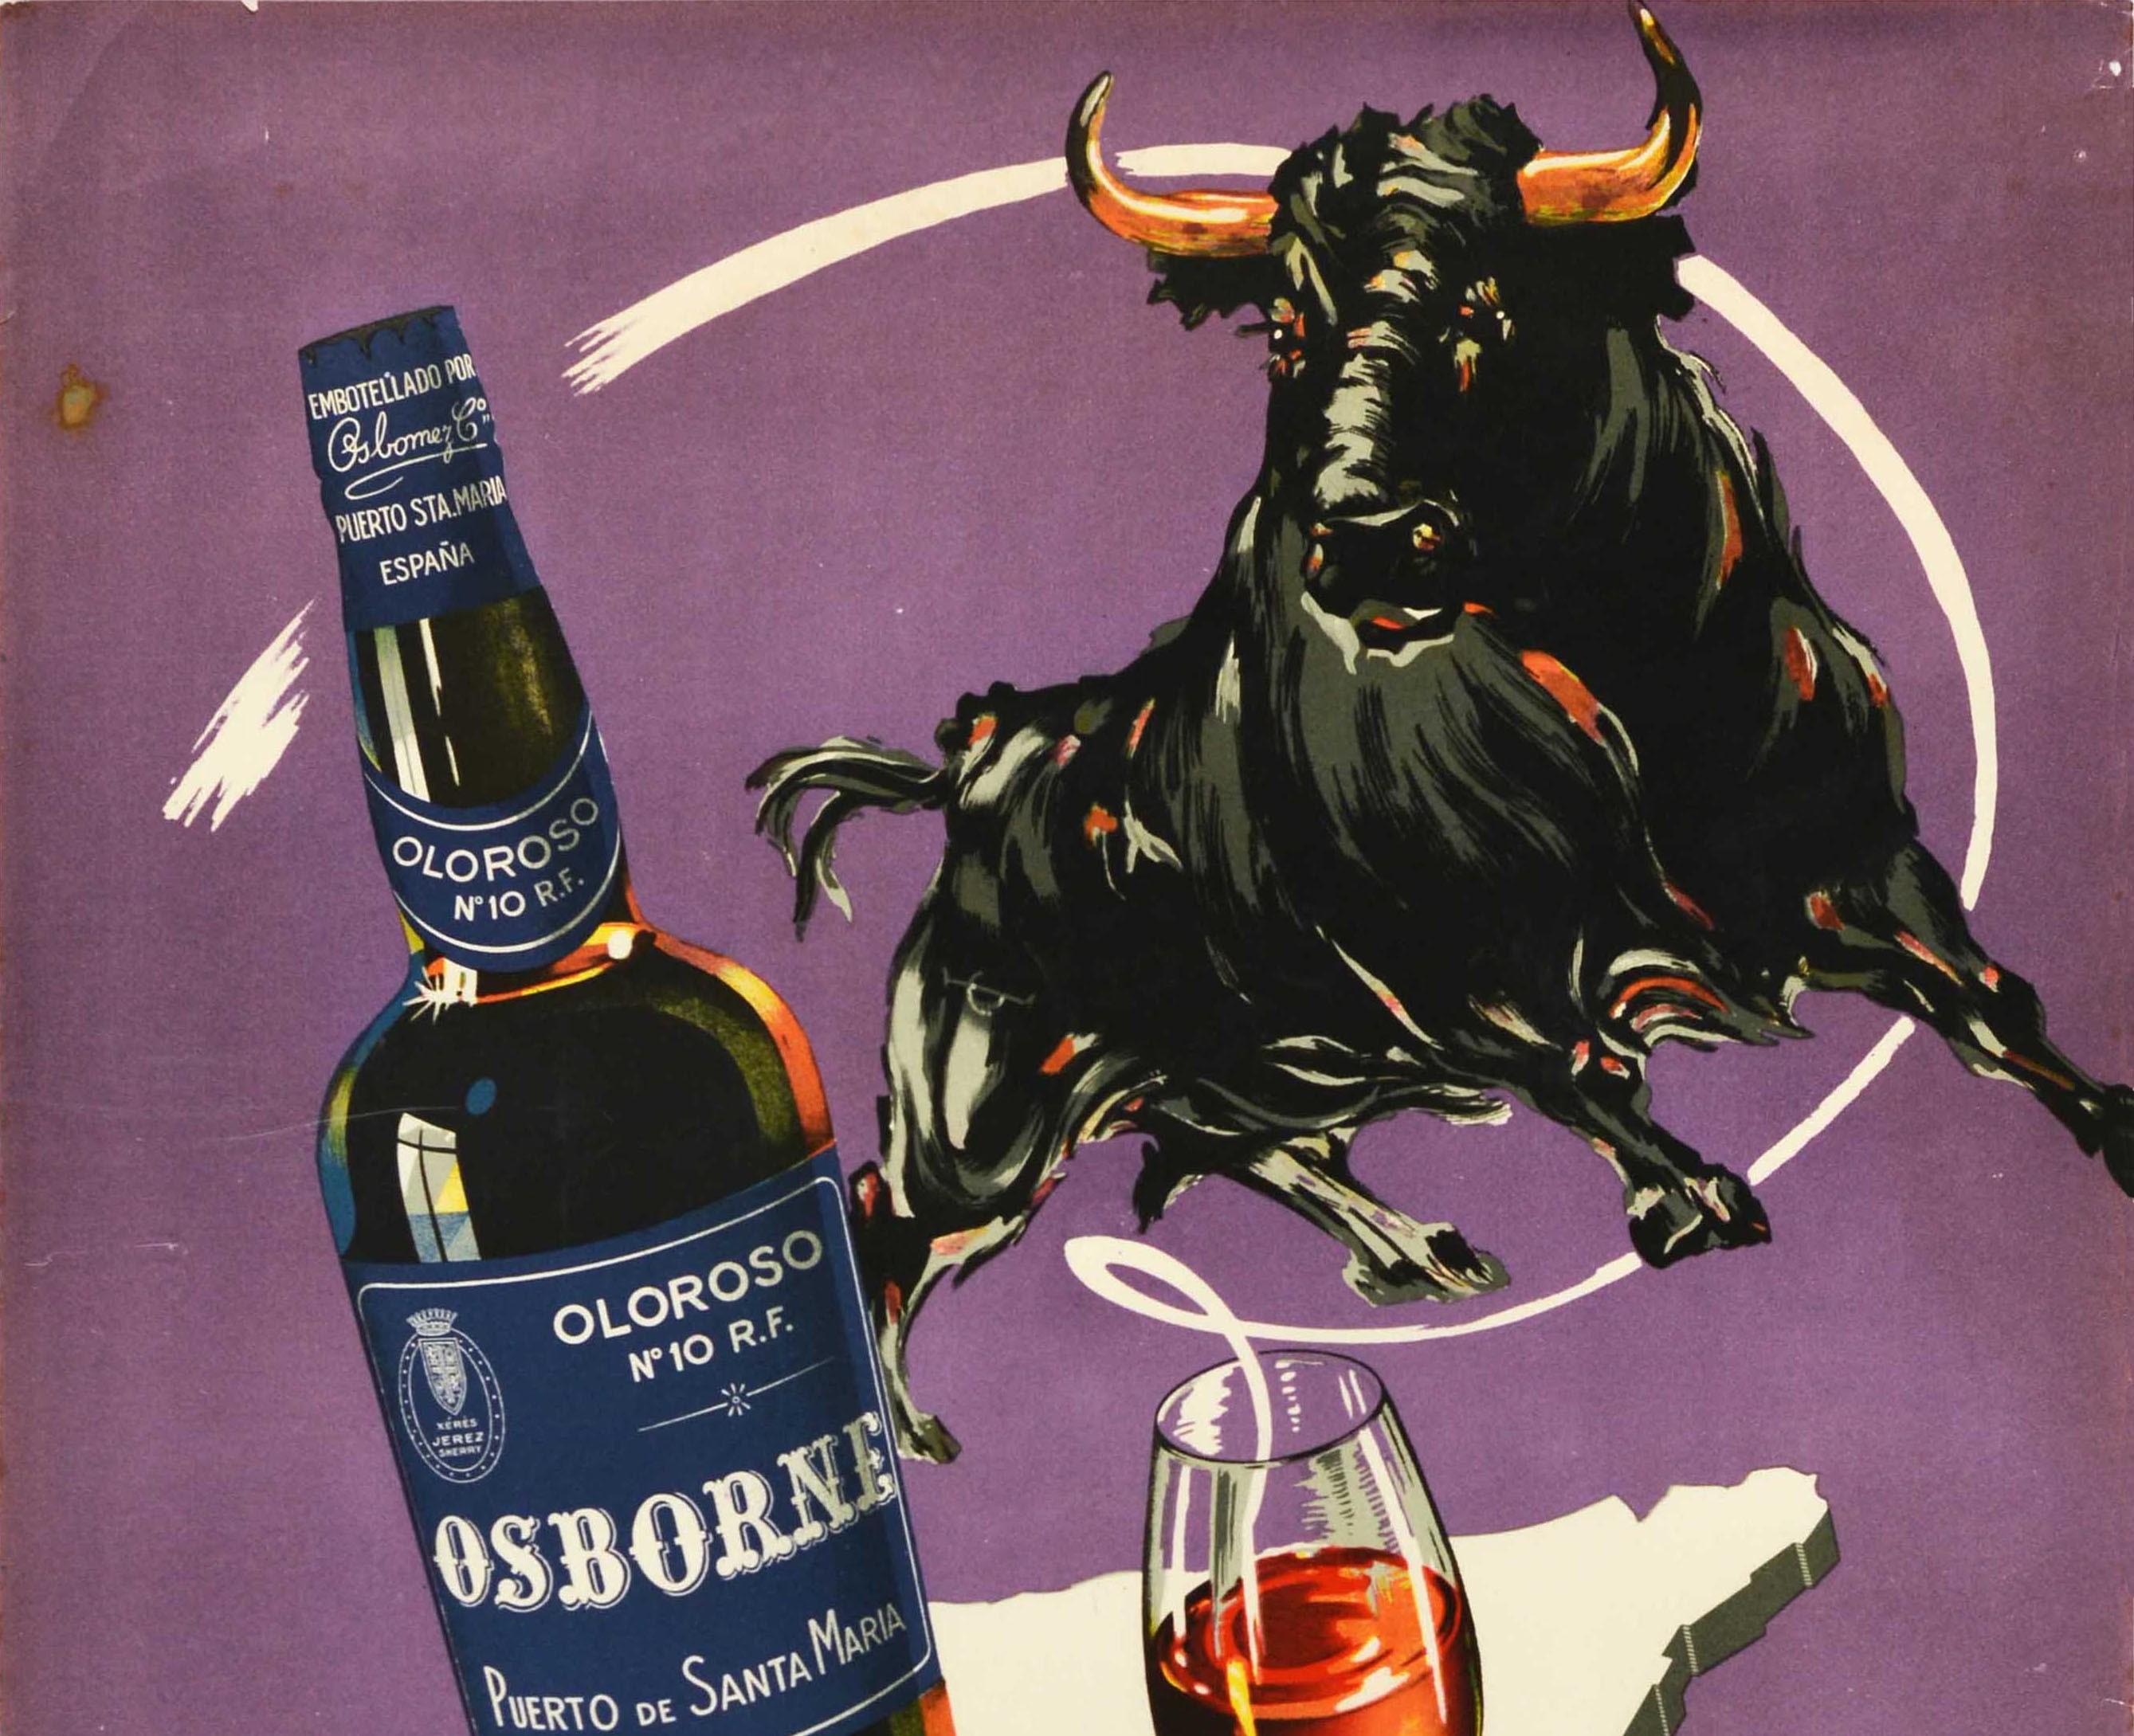 Original vintage drink advertising poster for Oloroso No.10 R.F. Osborne Sherry / Xeres / Jerez Puerto de Santa Maria Espana featuring a great design depicting a bull above a bottle of the sherry wine made from palomino grapes next to a glass on an